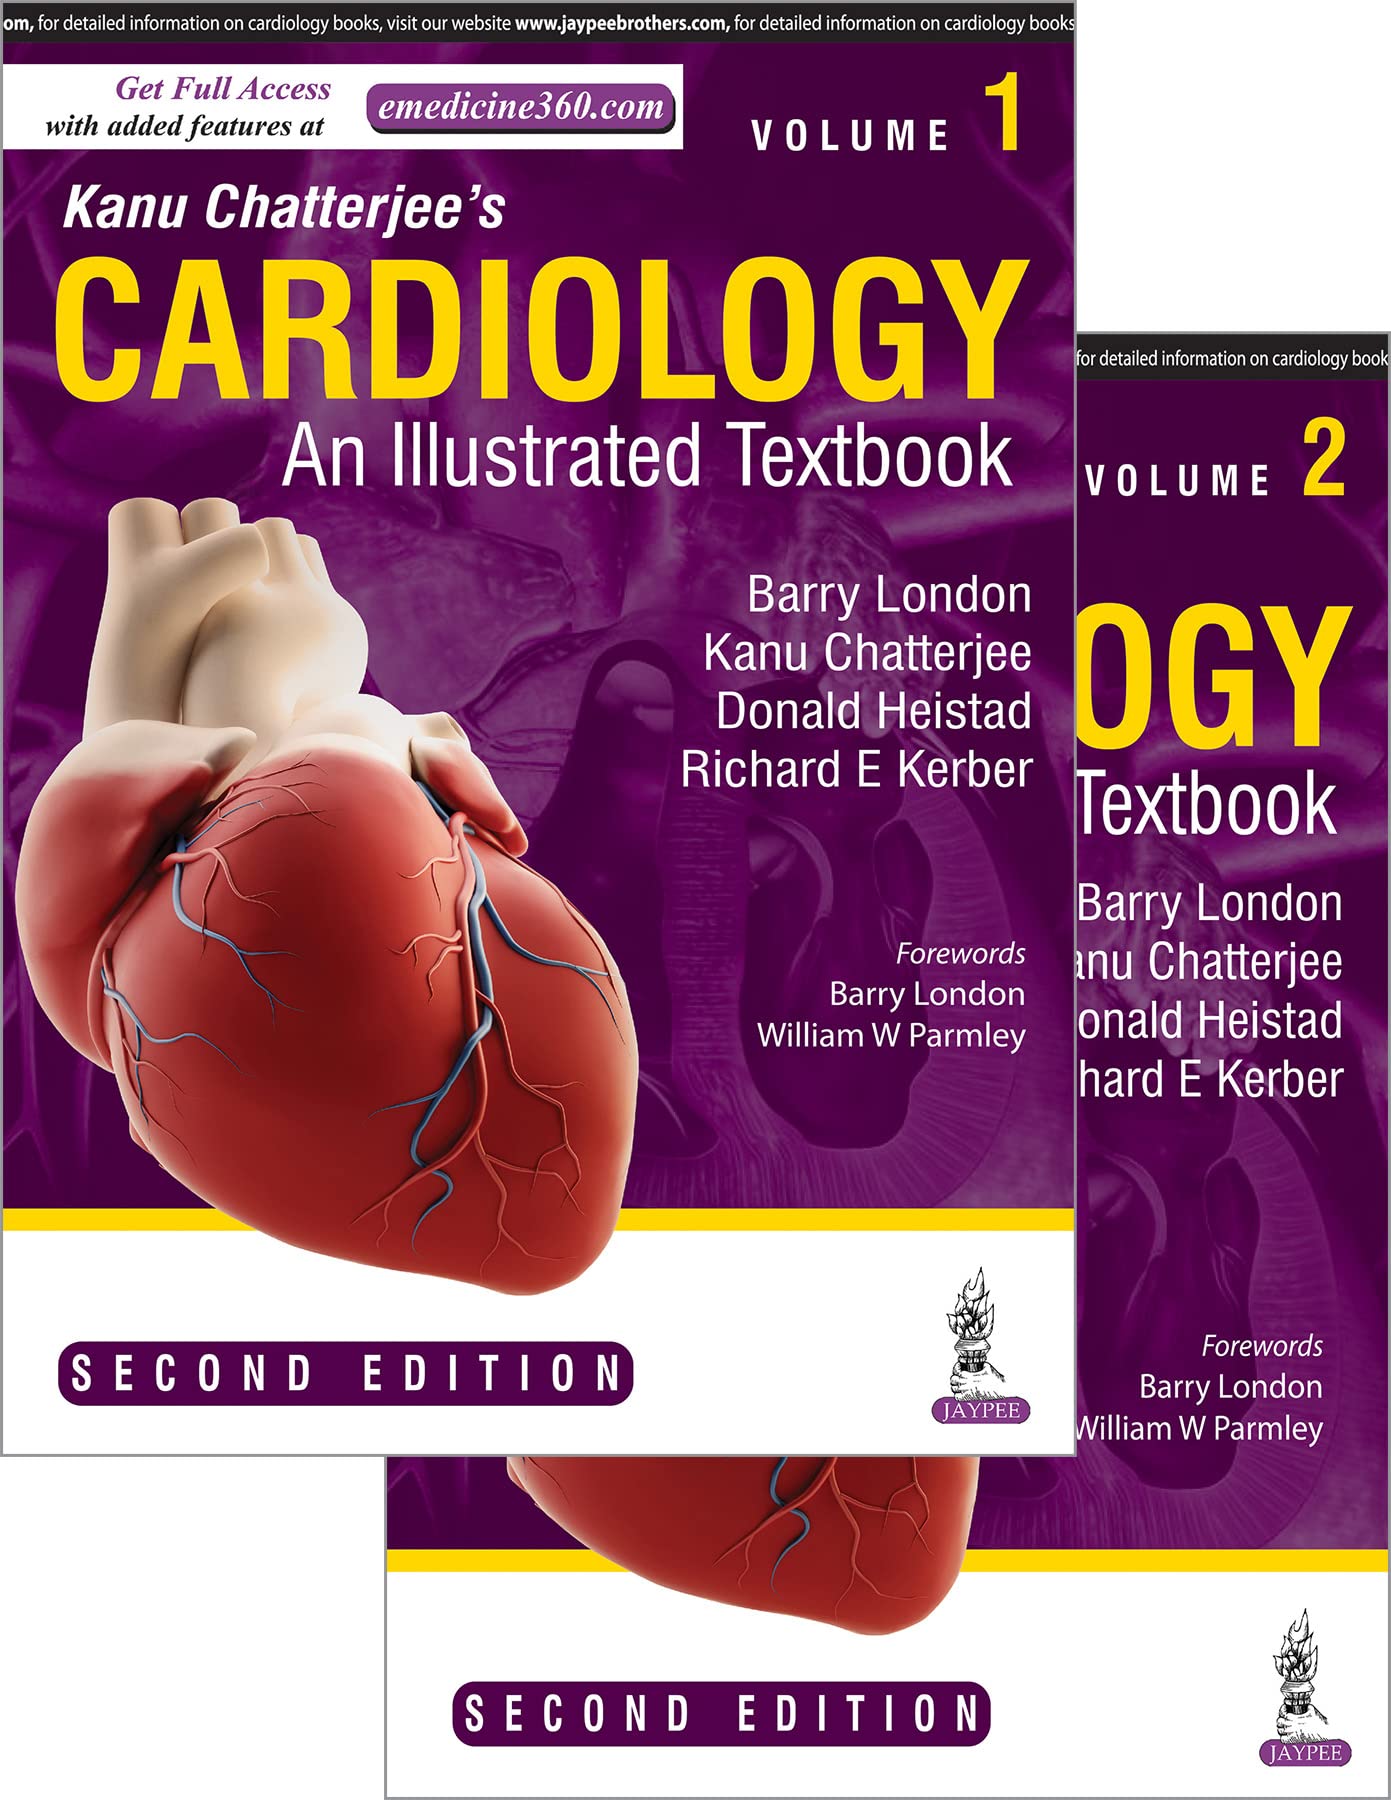 Cardiology - An Illustrated Textbook (2 Volume Set), 2nd Edition  by Barry London